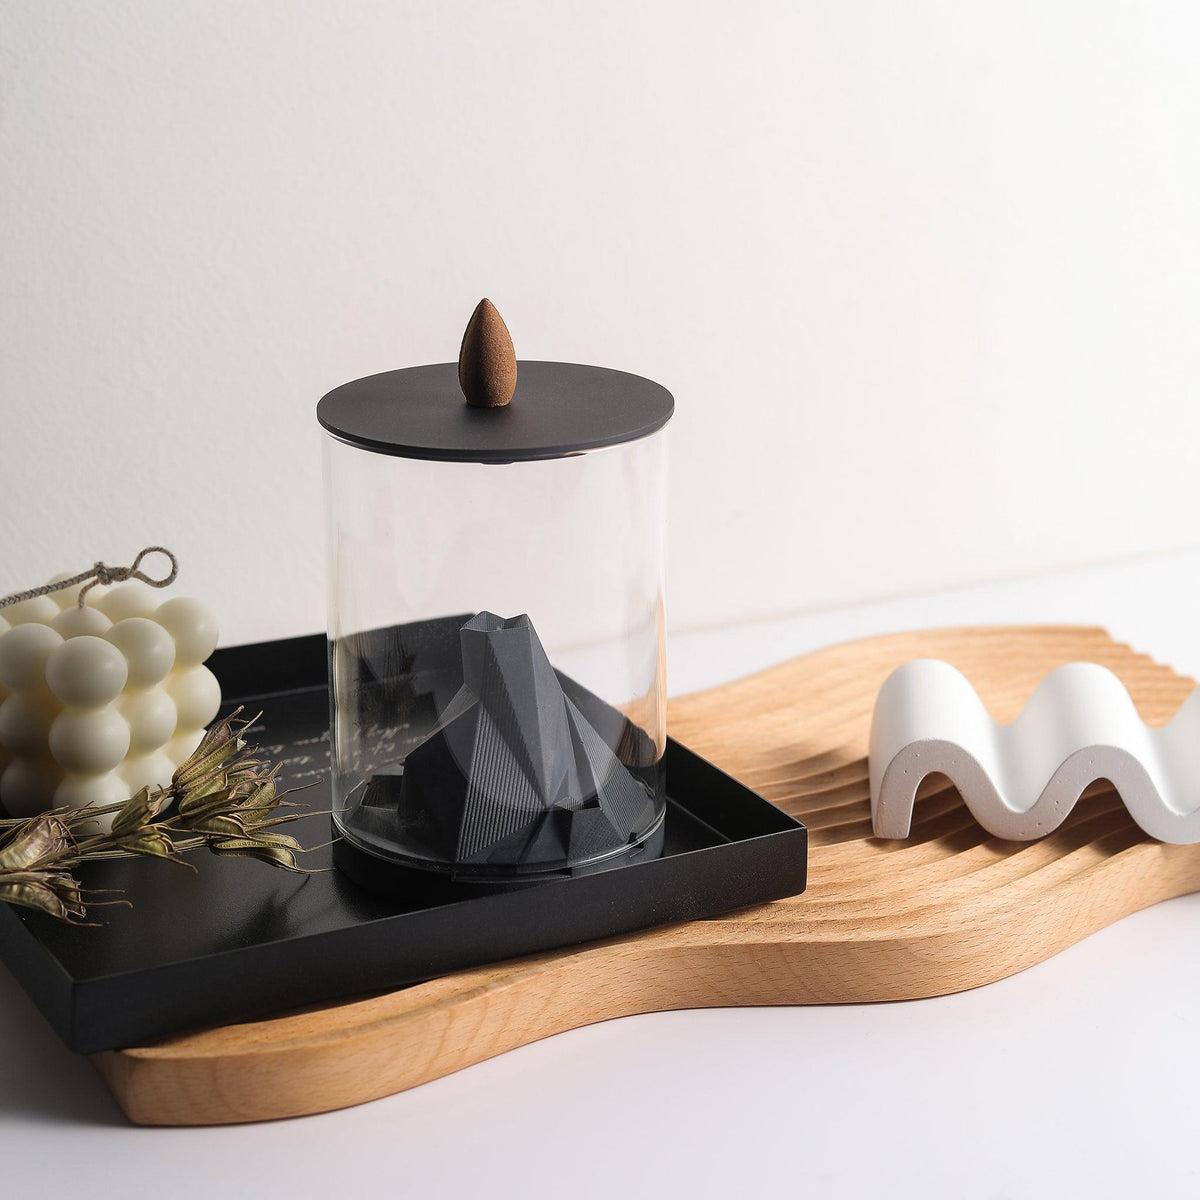 Caldera Terrarium Backflow Incense Burner by Kin Objects placed on table